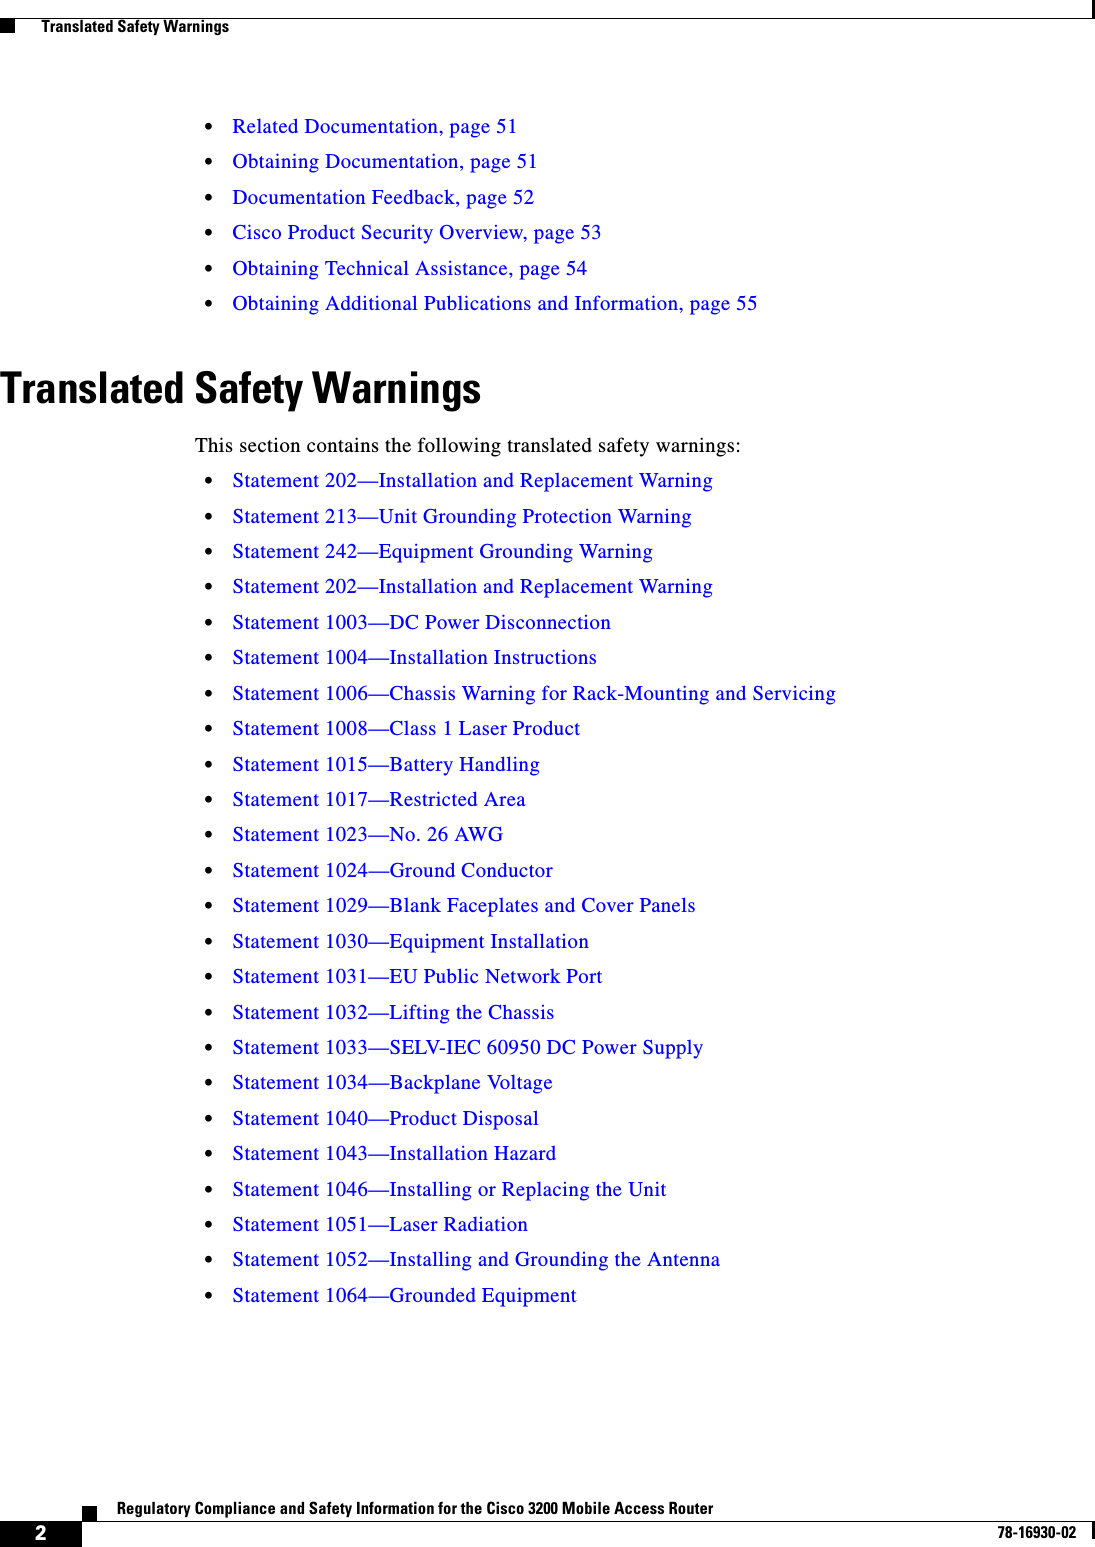 2Regulatory Compliance and Safety Information for the Cisco 3200 Mobile Access Router78-16930-02  Translated Safety Warnings•Related Documentation, page 51•Obtaining Documentation, page 51•Documentation Feedback, page 52•Cisco Product Security Overview, page 53•Obtaining Technical Assistance, page 54•Obtaining Additional Publications and Information, page 55Translated Safety WarningsThis section contains the following translated safety warnings:•Statement 202—Installation and Replacement Warning•Statement 213—Unit Grounding Protection Warning•Statement 242—Equipment Grounding Warning•Statement 202—Installation and Replacement Warning•Statement 1003—DC Power Disconnection•Statement 1004—Installation Instructions•Statement 1006—Chassis Warning for Rack-Mounting and Servicing•Statement 1008—Class 1 Laser Product•Statement 1015—Battery Handling•Statement 1017—Restricted Area•Statement 1023—No. 26 AWG•Statement 1024—Ground Conductor•Statement 1029—Blank Faceplates and Cover Panels•Statement 1030—Equipment Installation•Statement 1031—EU Public Network Port•Statement 1032—Lifting the Chassis•Statement 1033—SELV-IEC 60950 DC Power Supply•Statement 1034—Backplane Voltage•Statement 1040—Product Disposal•Statement 1043—Installation Hazard•Statement 1046—Installing or Replacing the Unit•Statement 1051—Laser Radiation•Statement 1052—Installing and Grounding the Antenna•Statement 1064—Grounded Equipment